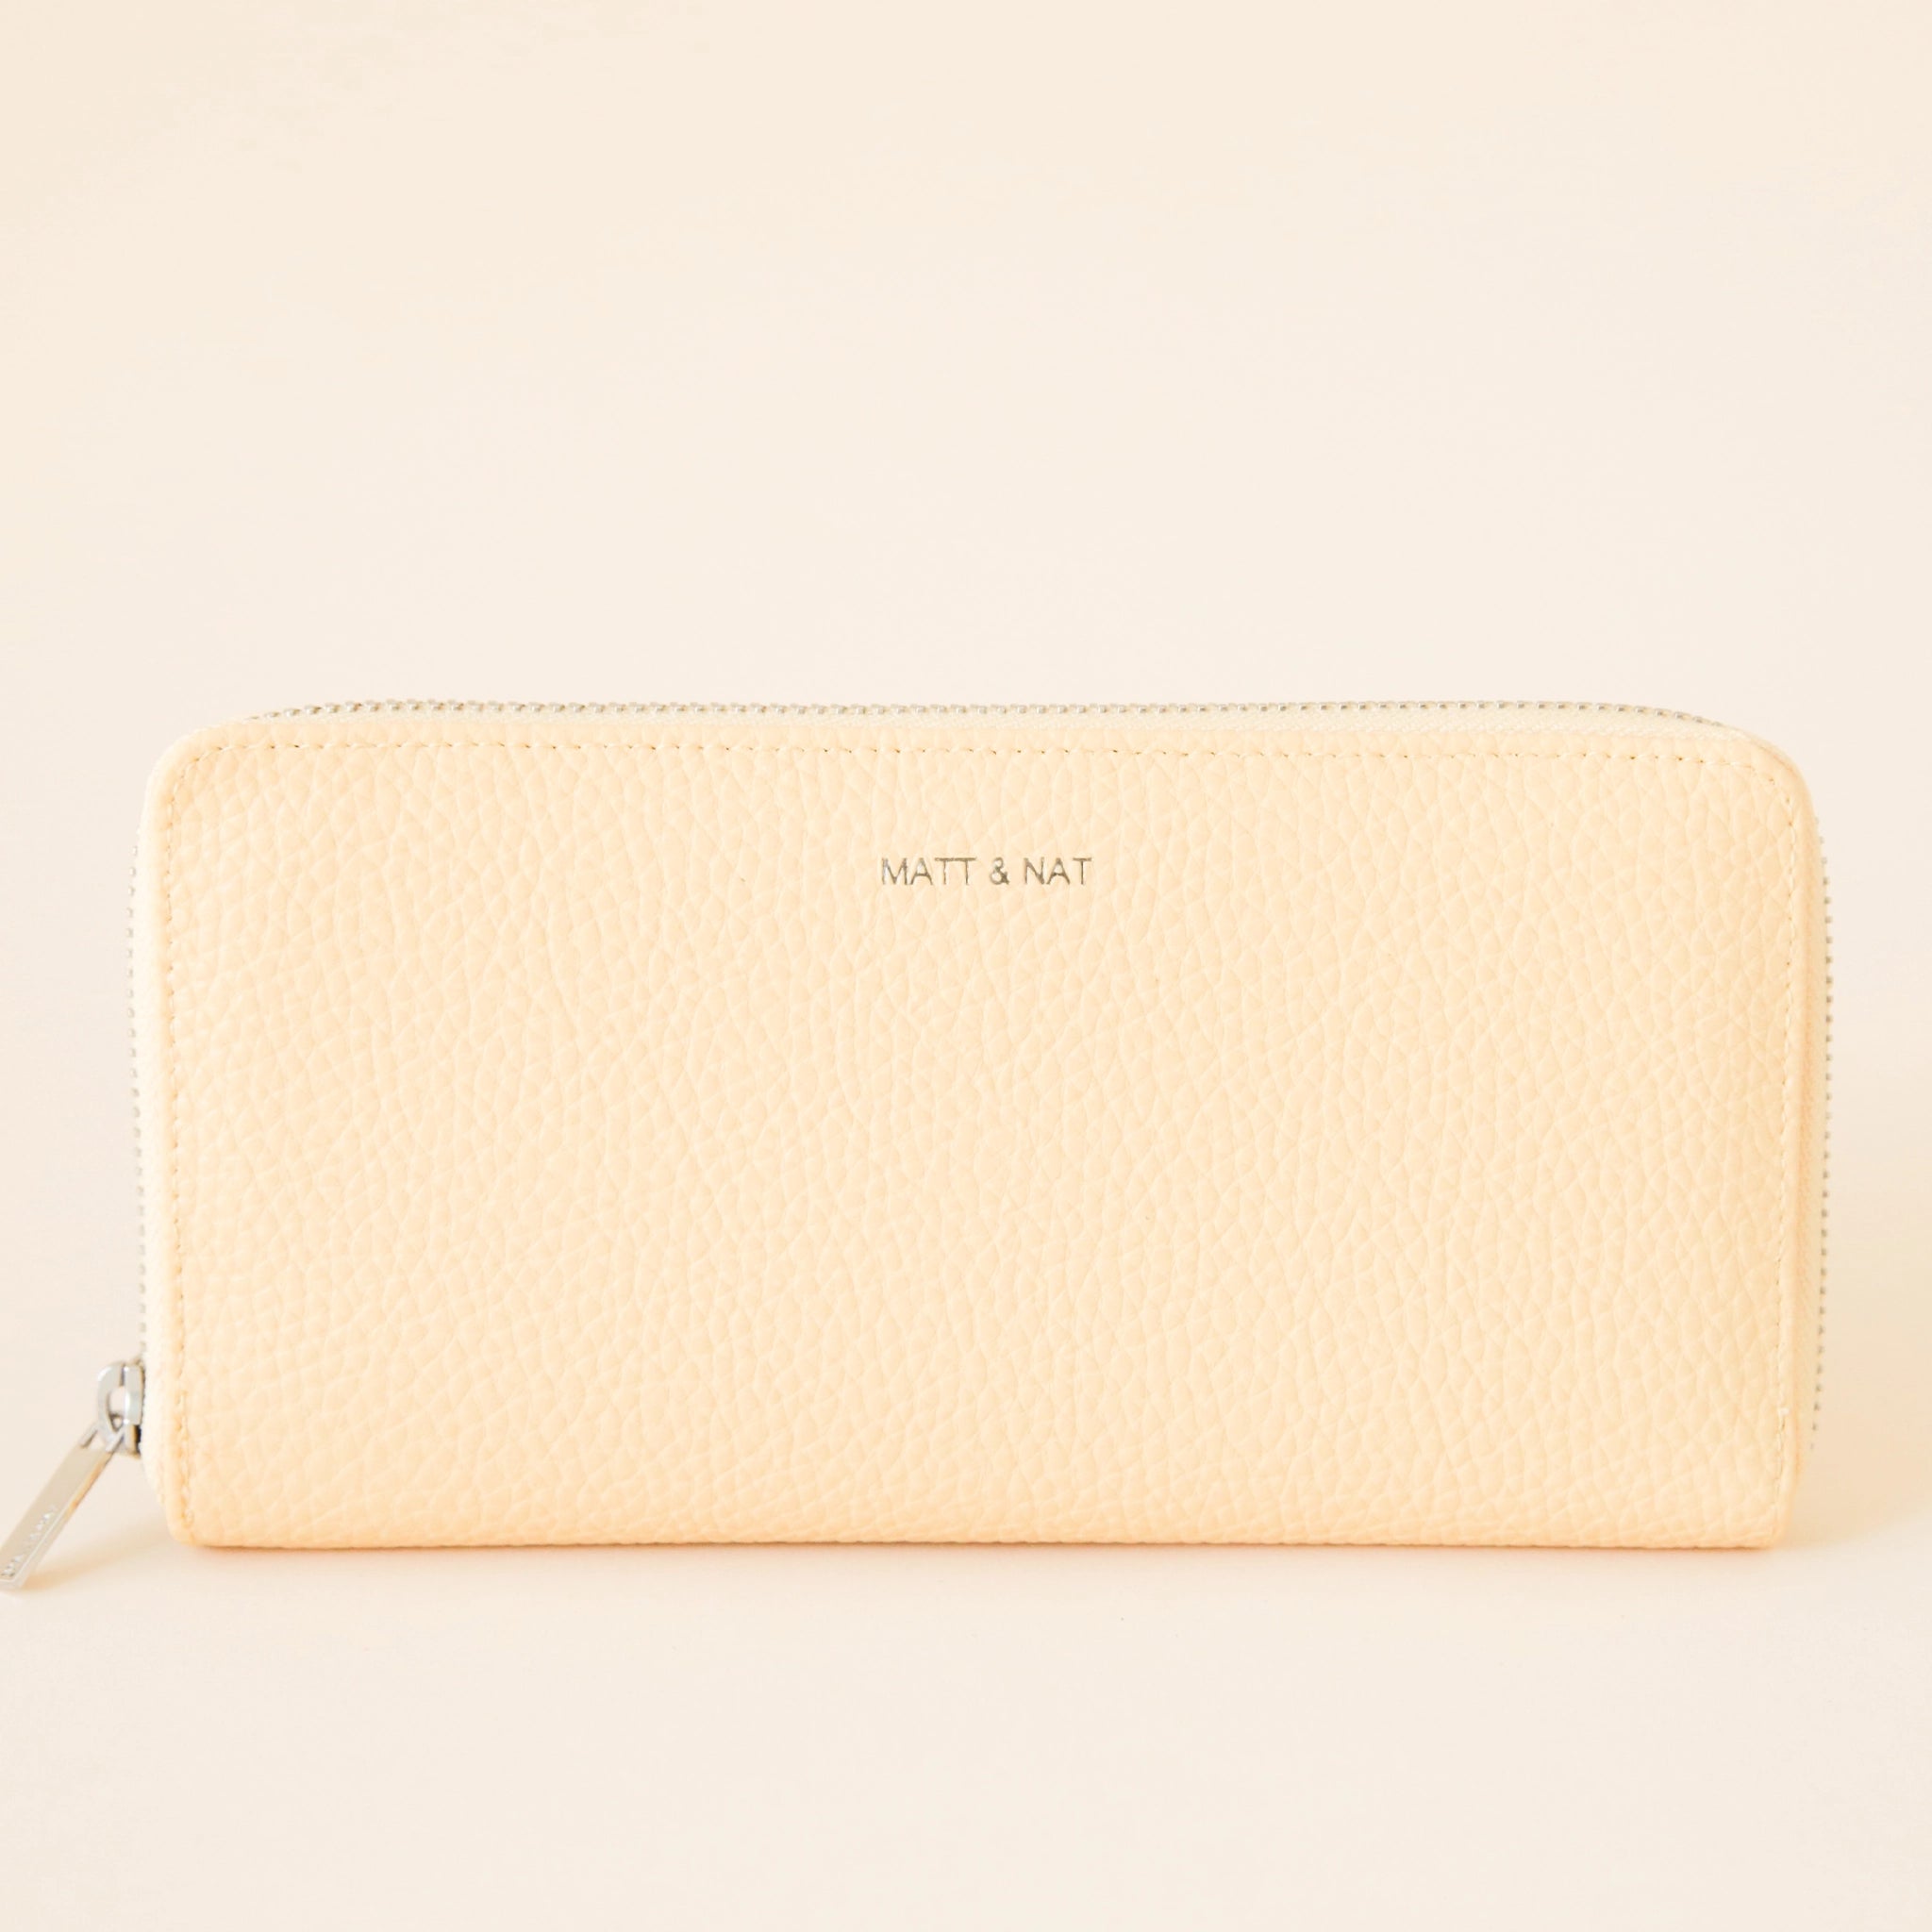 On a cream background is a light yellow zip wallet with silver detailing and "Matt & Nat" written tiny on the front of the wallet. 